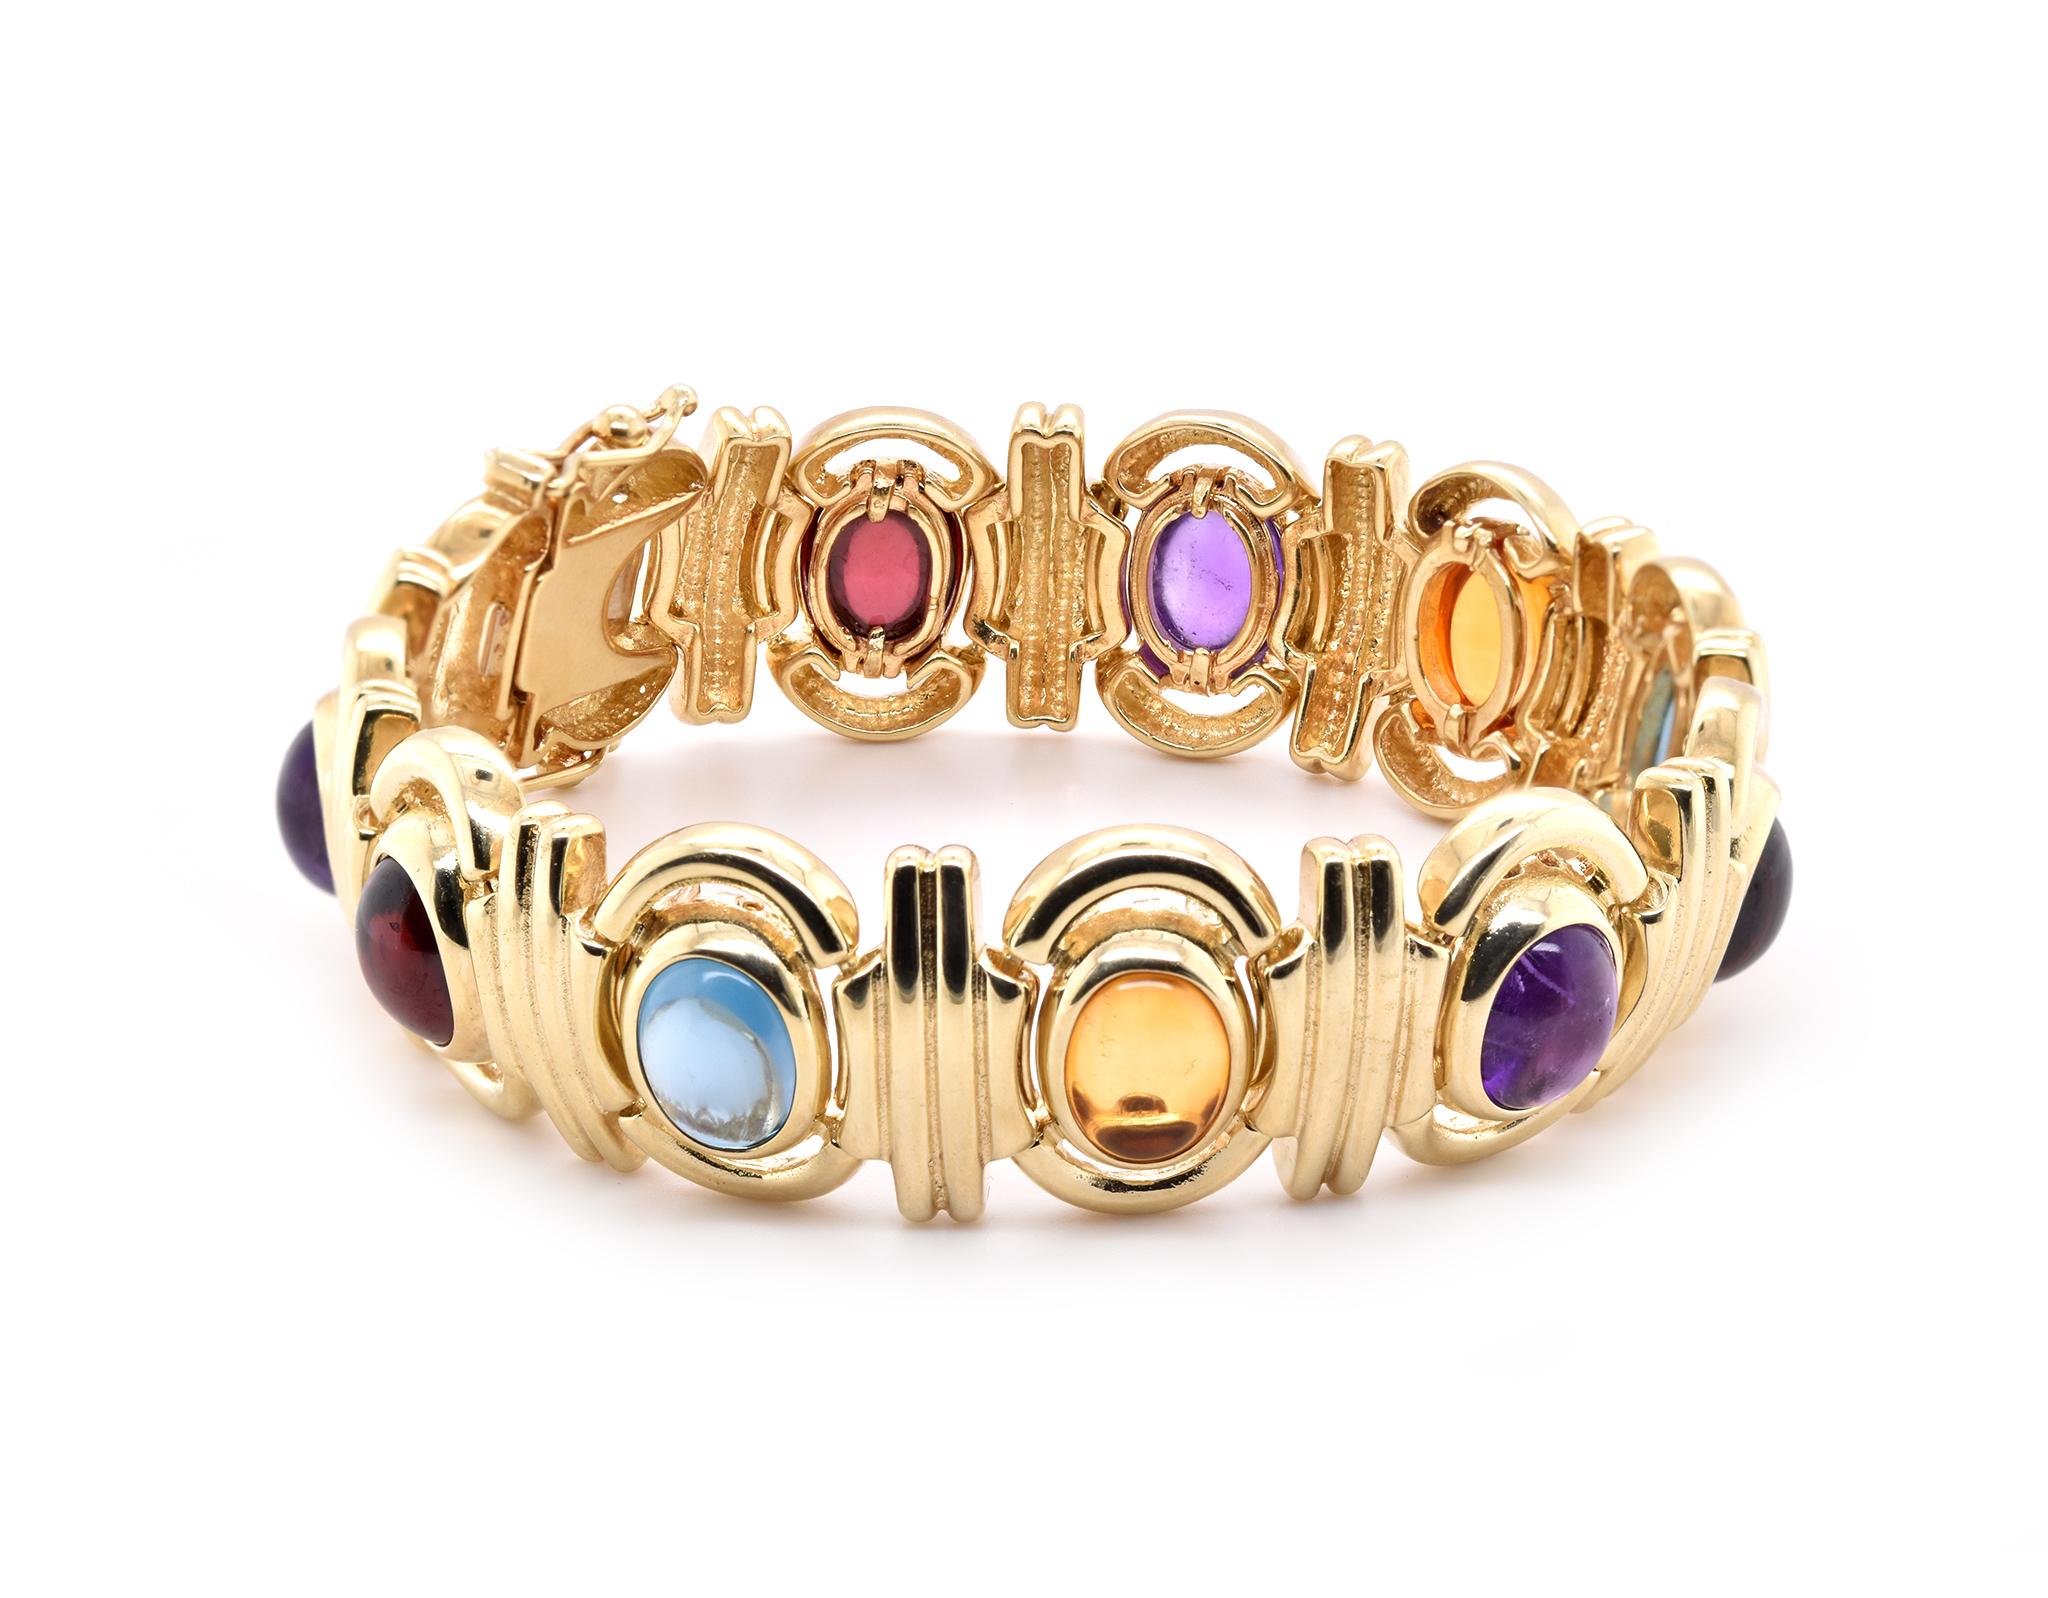 Material: 14K yellow gold 
Dimensions: bracelet will fit a 7-inch wrist, measures 16.5mm in width
Weight: 50.43 grams
